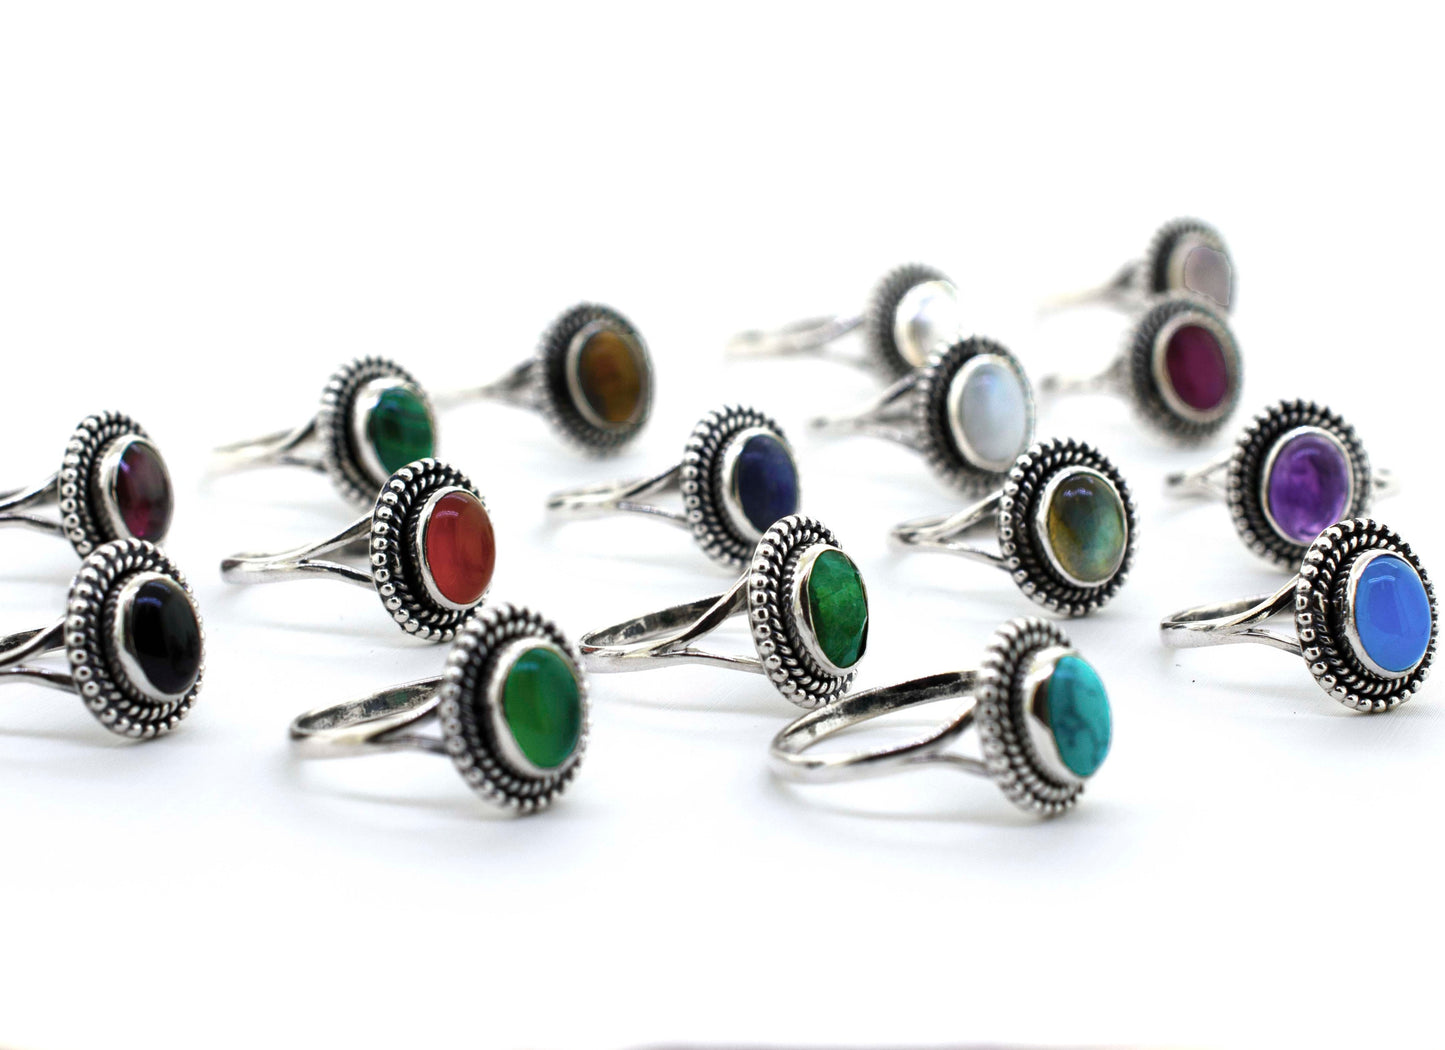 A boho-inspired collection of Gemstone Oval Shield Rings featuring stones in various vibrant hues.